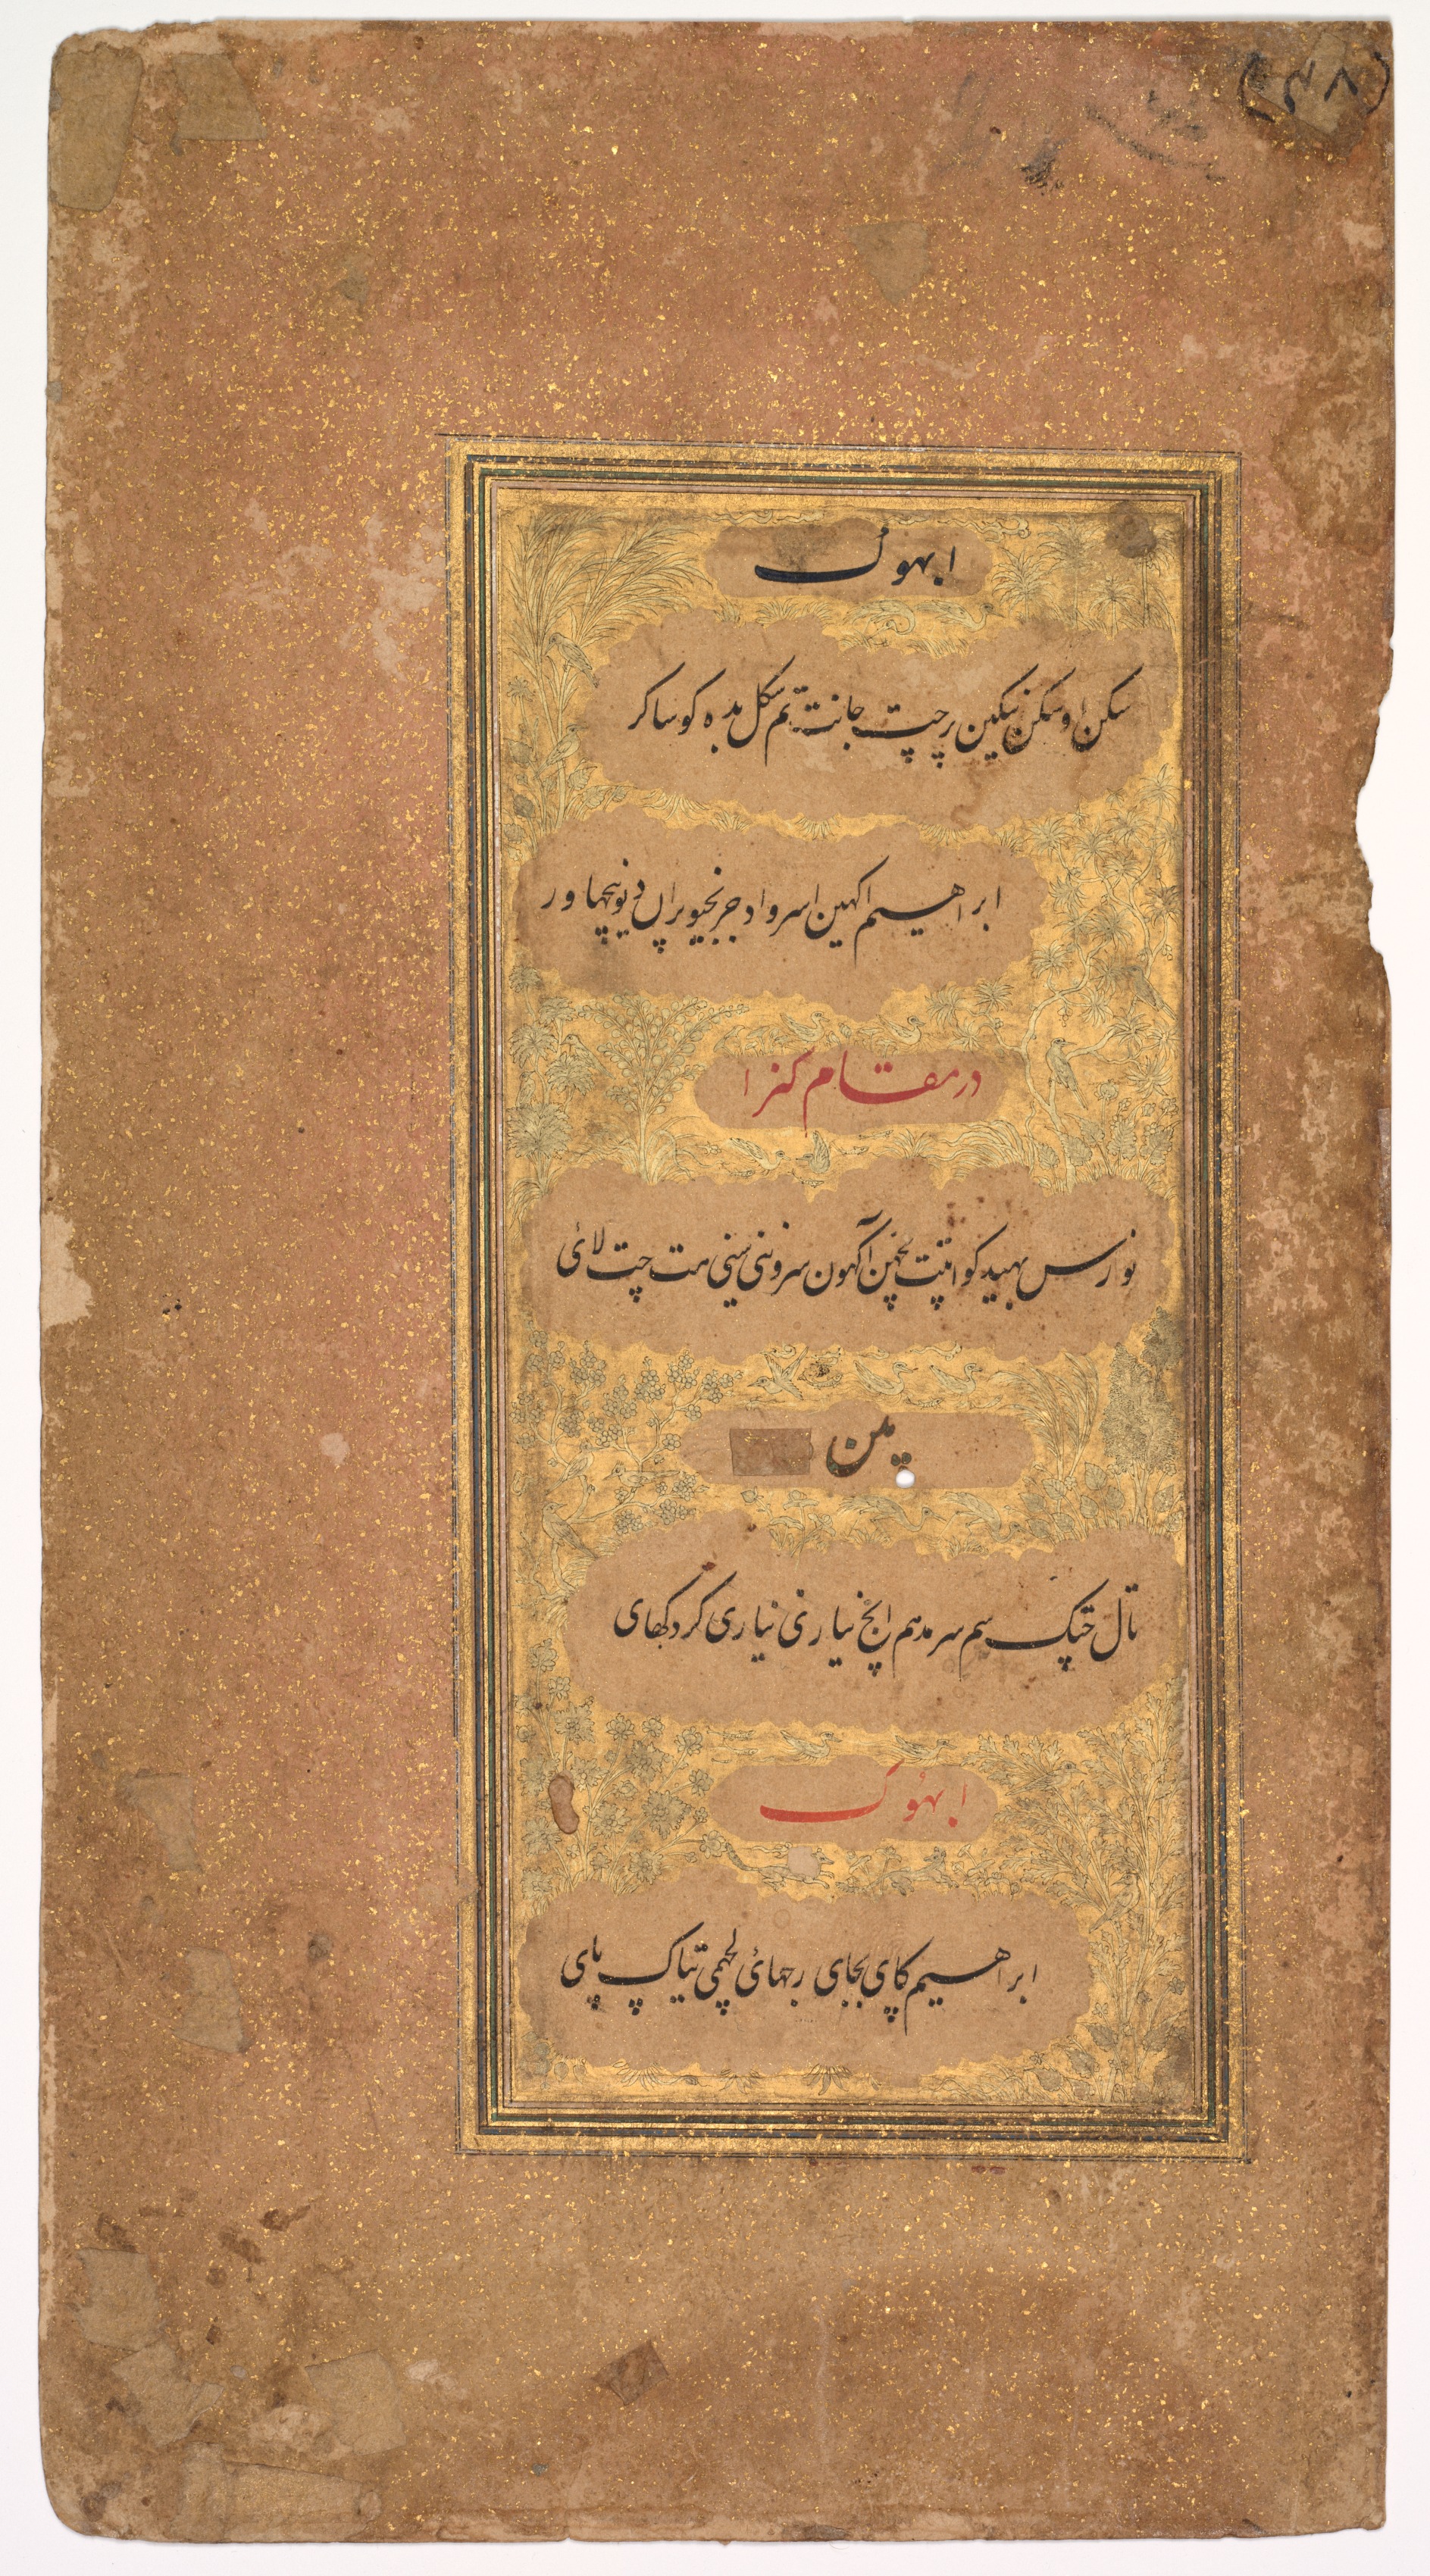 From Dohras (Songs) 40 and 42 from the Kitab-i Nauras (Book of Nine Essences) of Sultan Ibrahim Adil Shah II of Bijapur (r. 1580–1627) (recto)